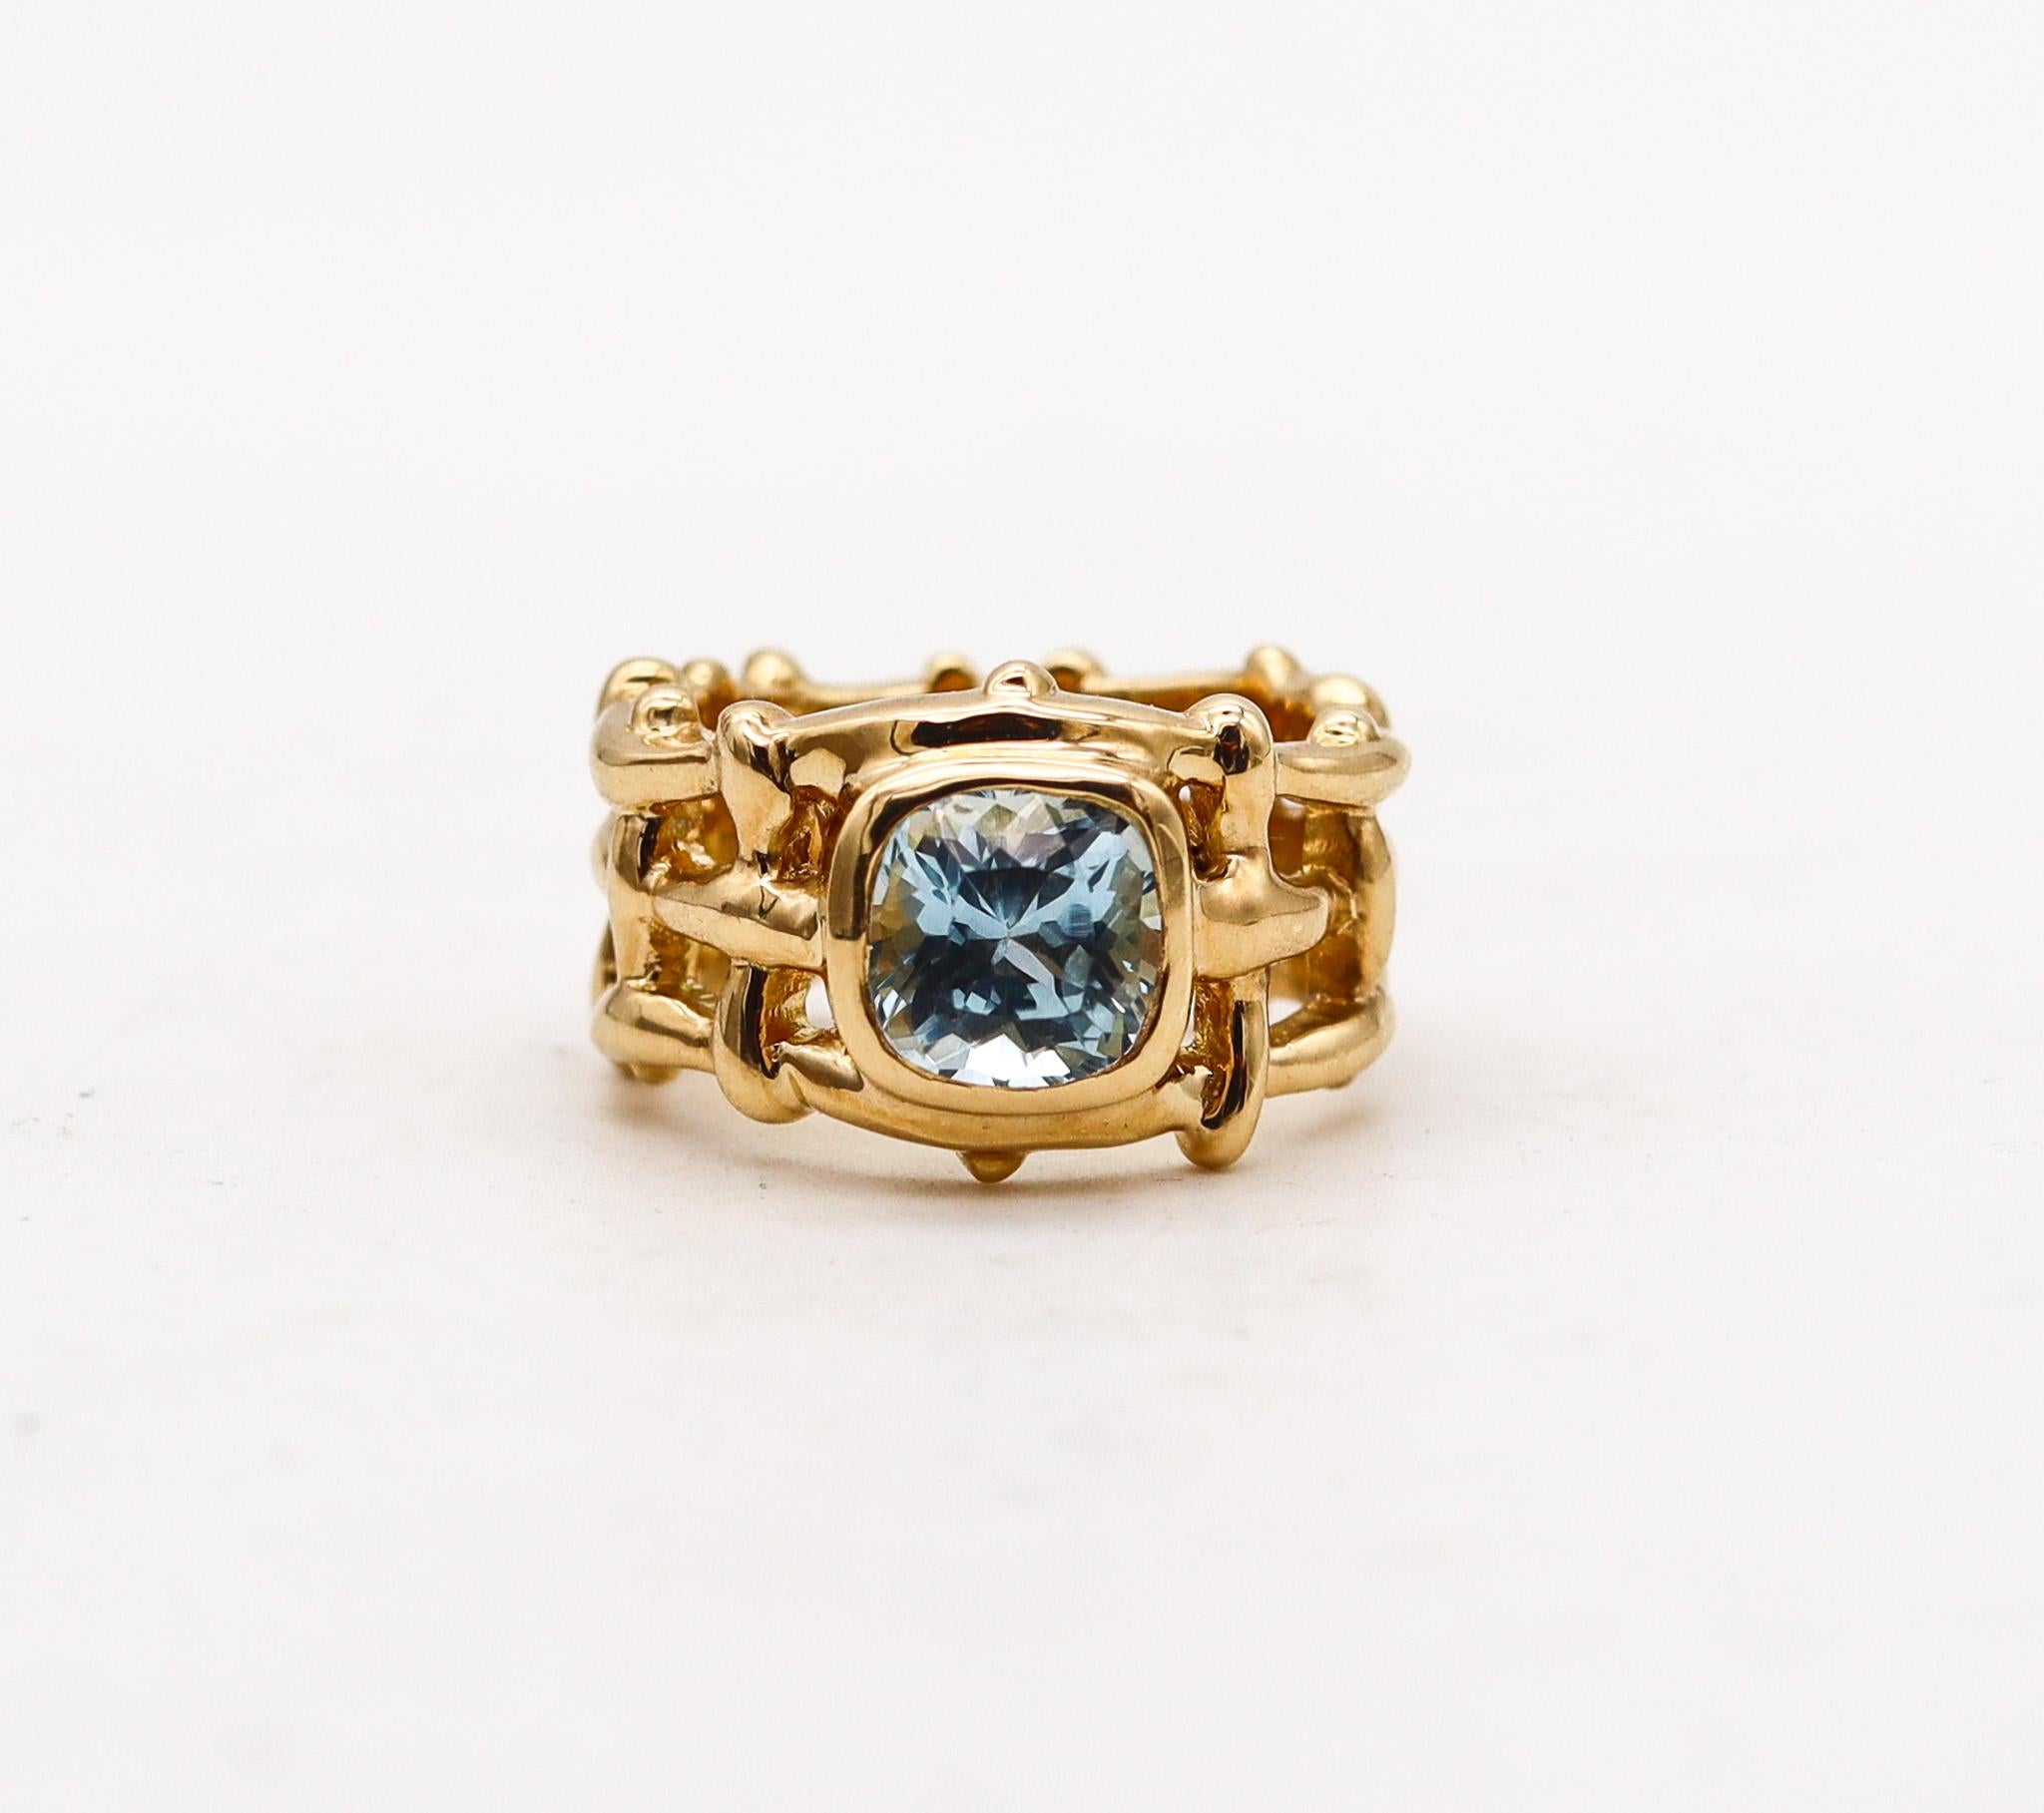 Modern Angela Cummings Studios Cocktail Ring In 18Kt Gold With 2.32 Cts Aquamarine For Sale